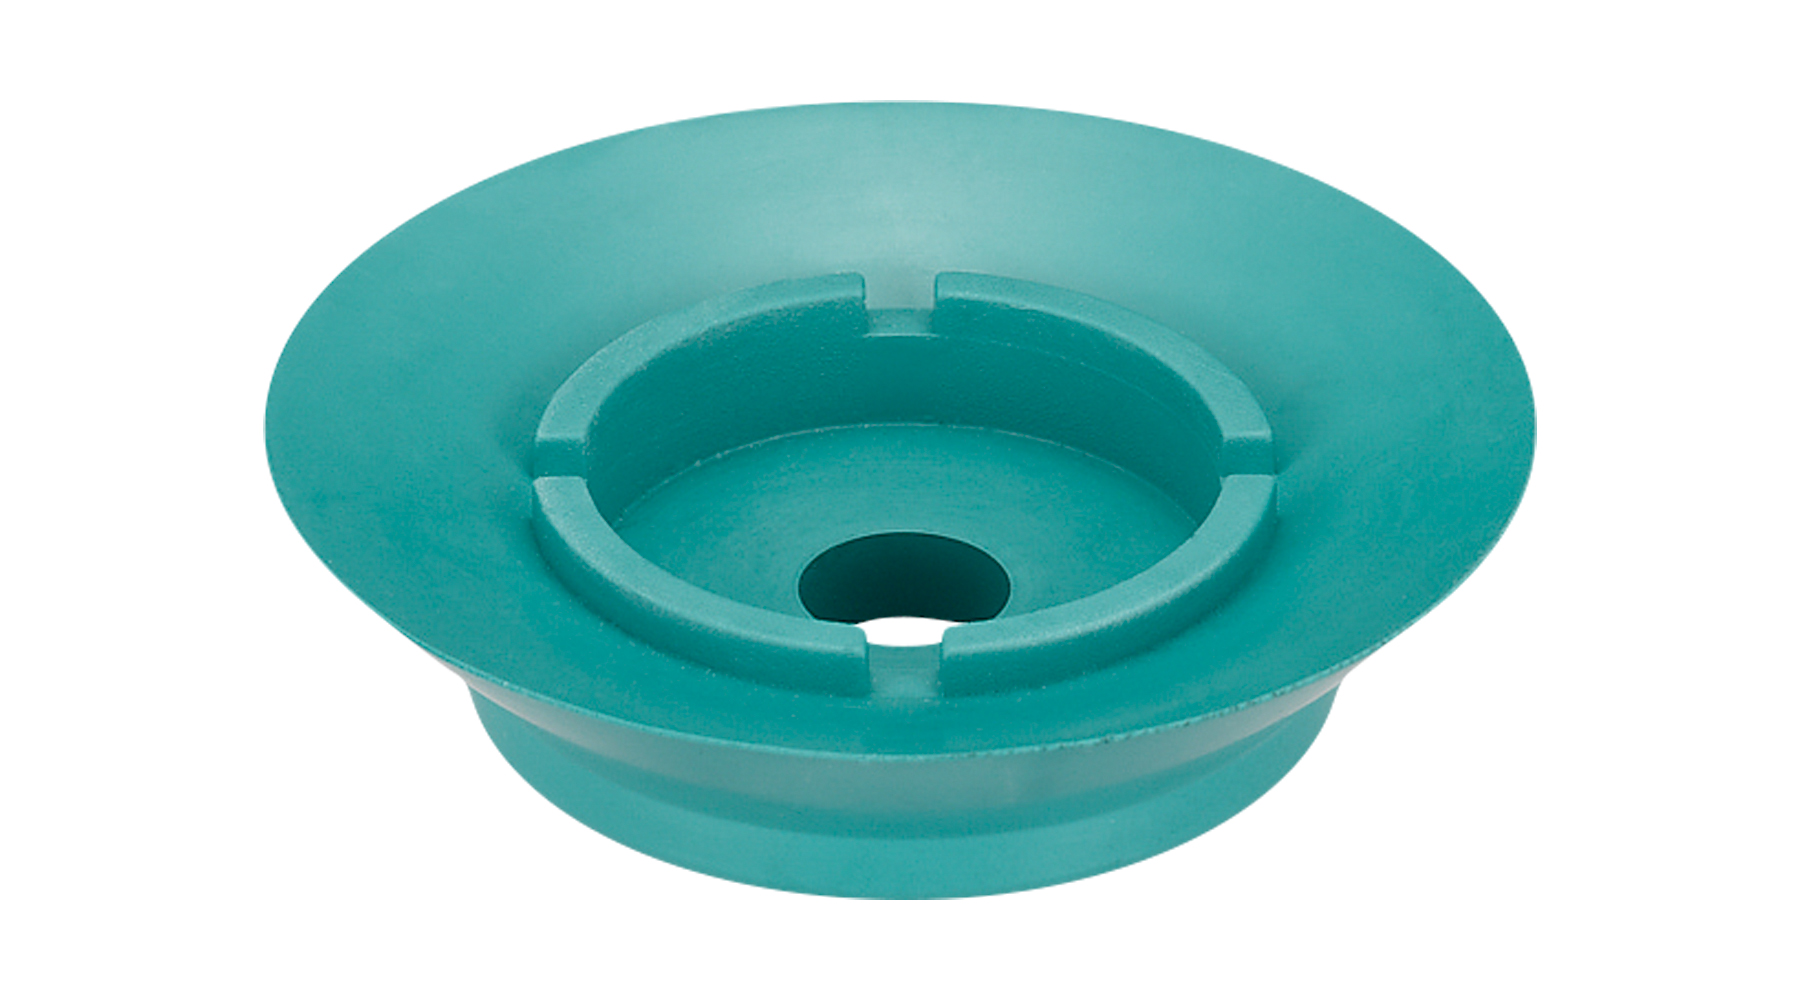 SUCTION CUP(SCREW MOUNT/NITRILE/GREEN)